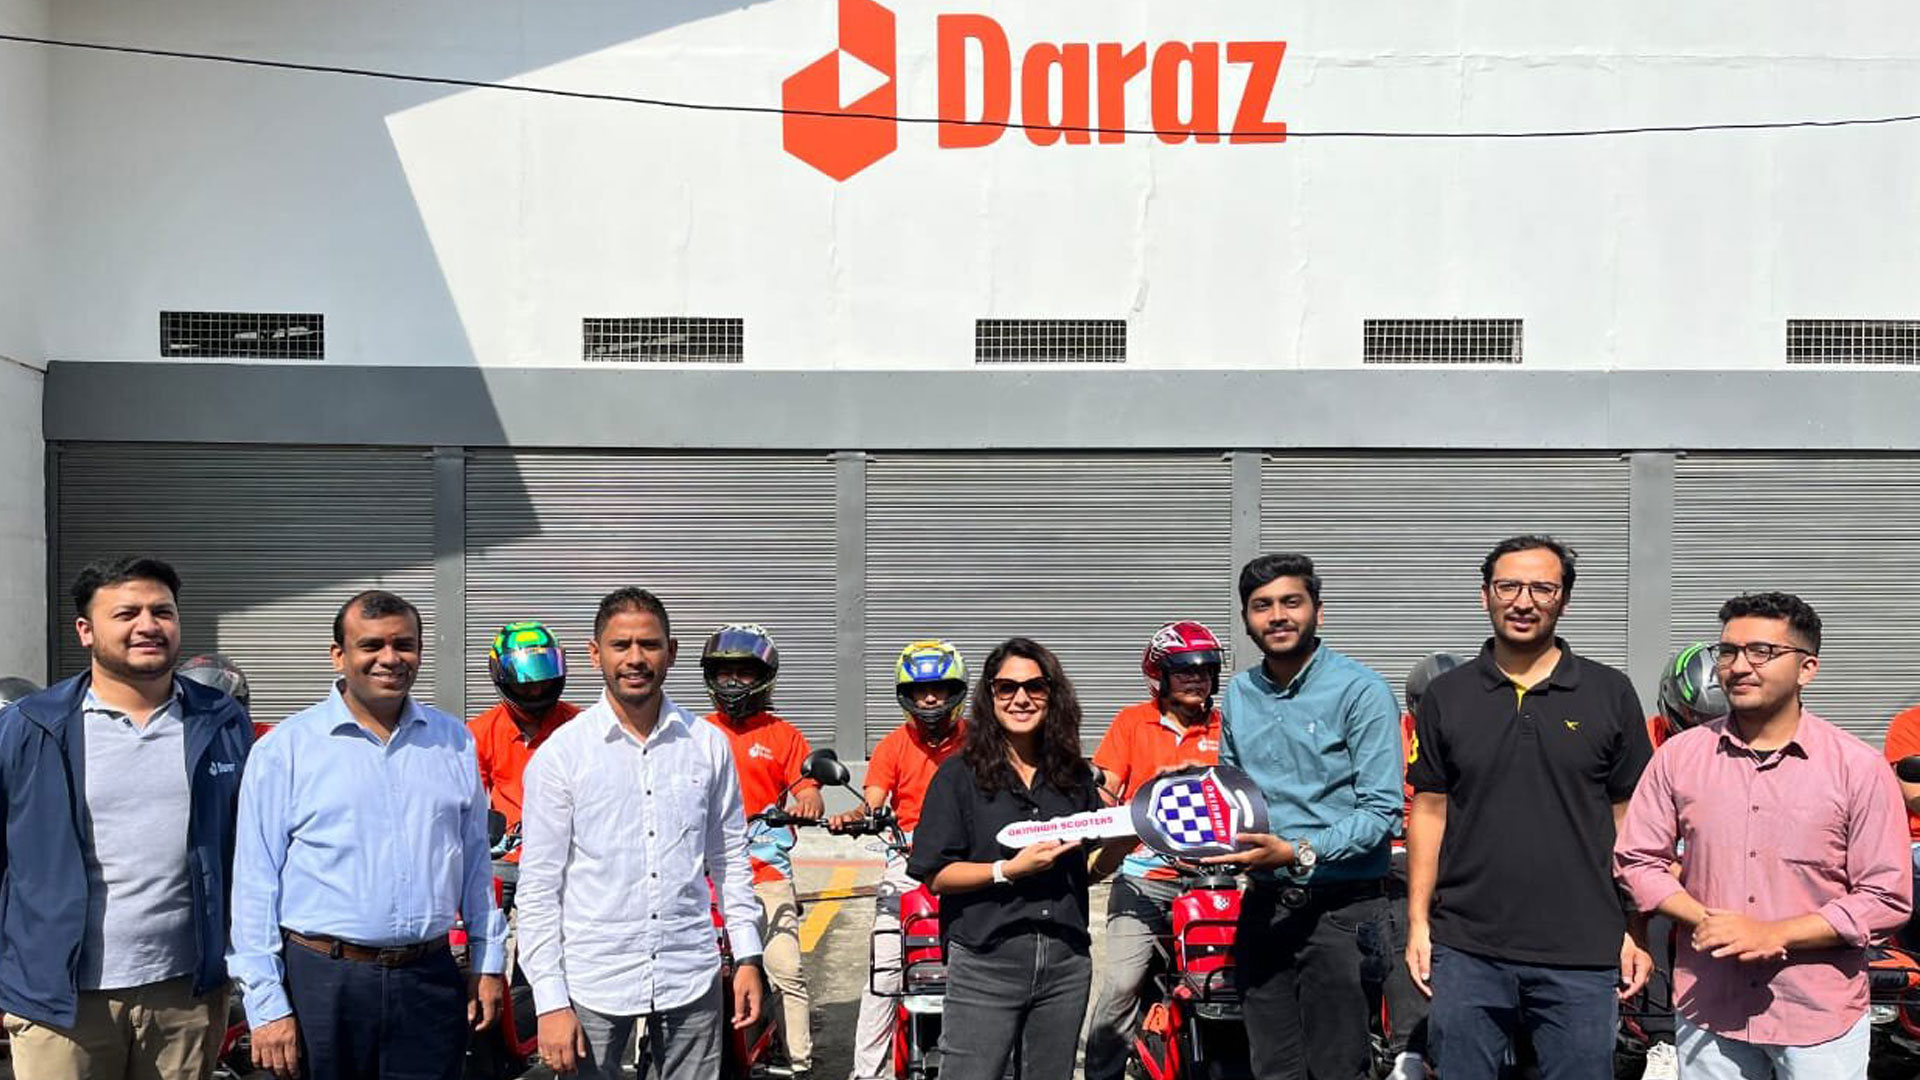 Daraz Moving Toward Environmentally Sustainable Operations, To use electric scooters for delivery